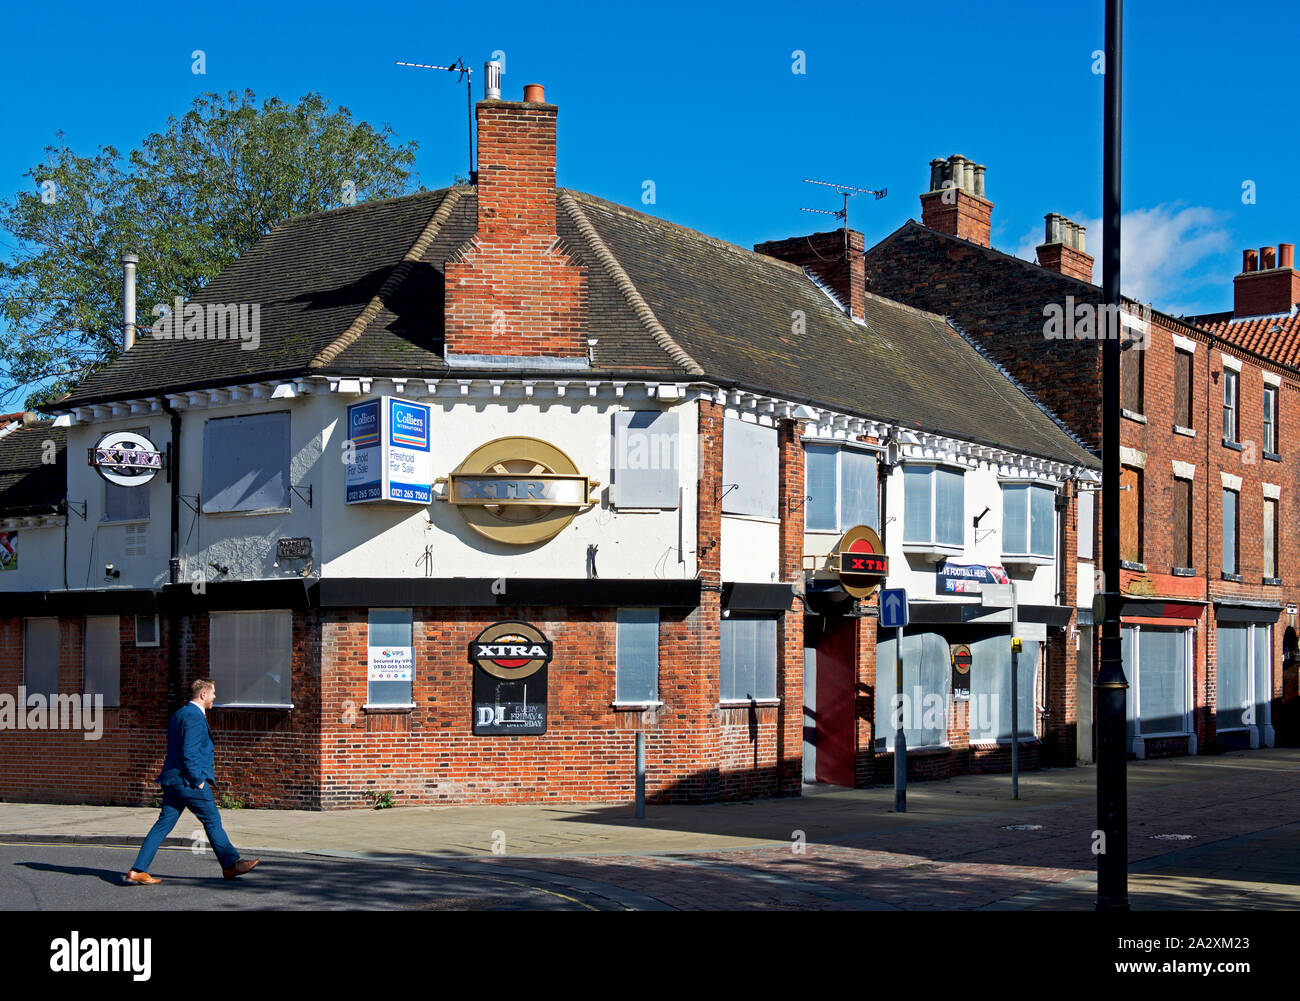 The Xtra pub, now closed down, in Gainsborough, Lincolnshire, England UK Stock Photo